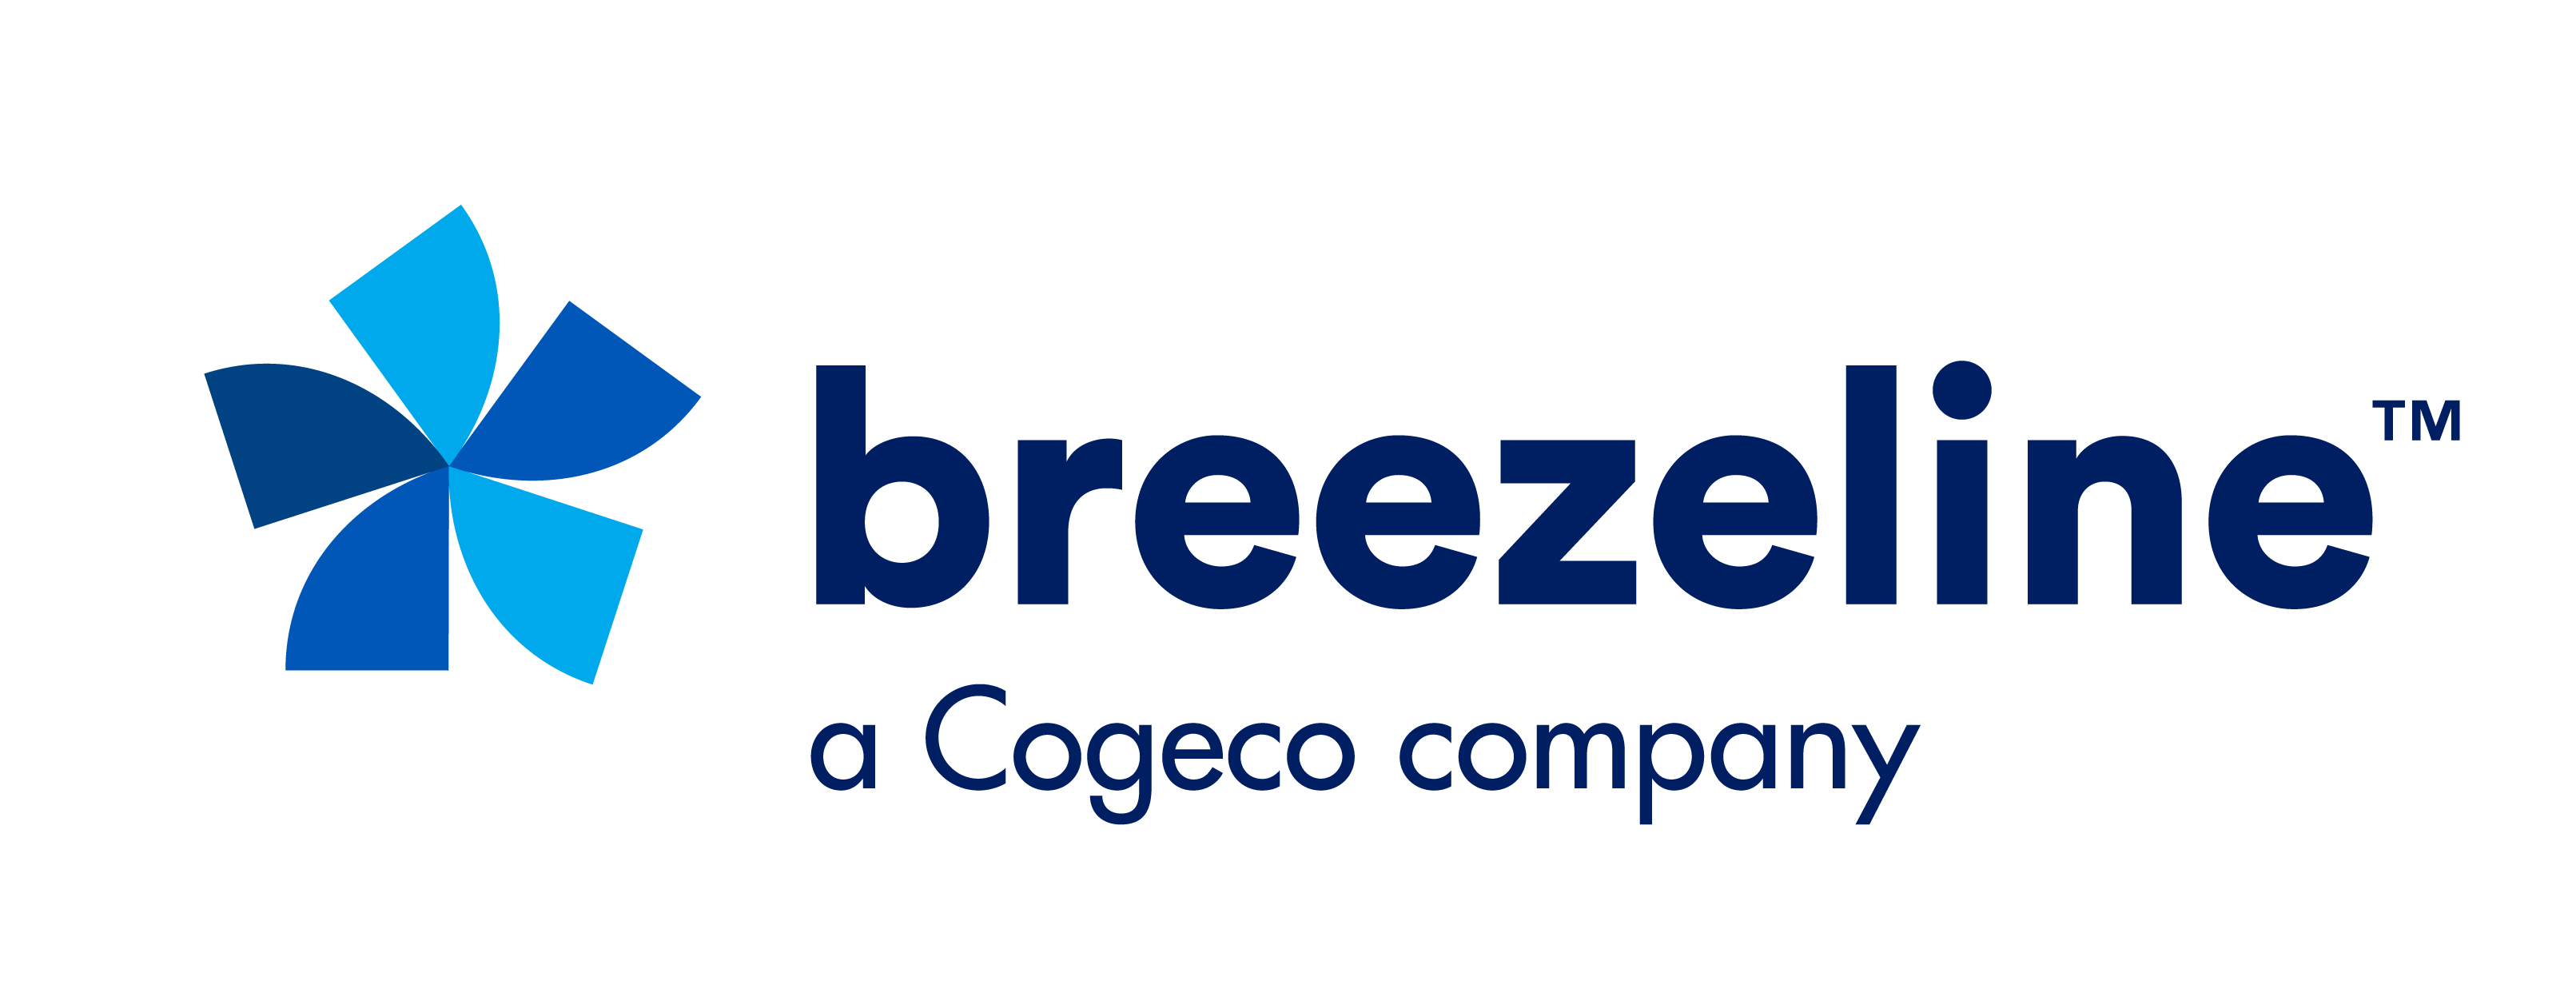 Breezeline promotes online safety through training and awareness